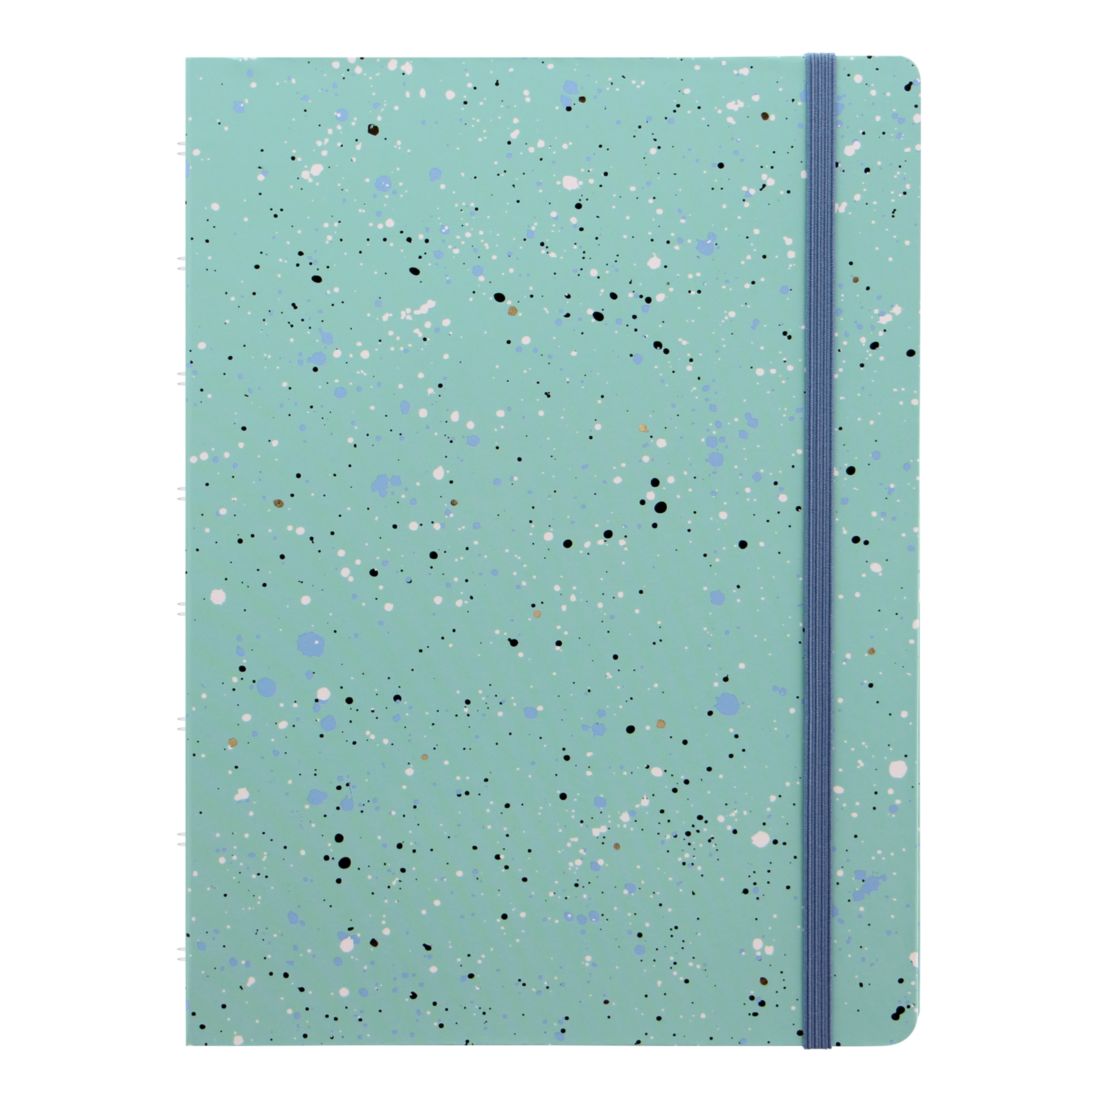 Filofax Refillable A5 Ruled Notebook Expressions Mint